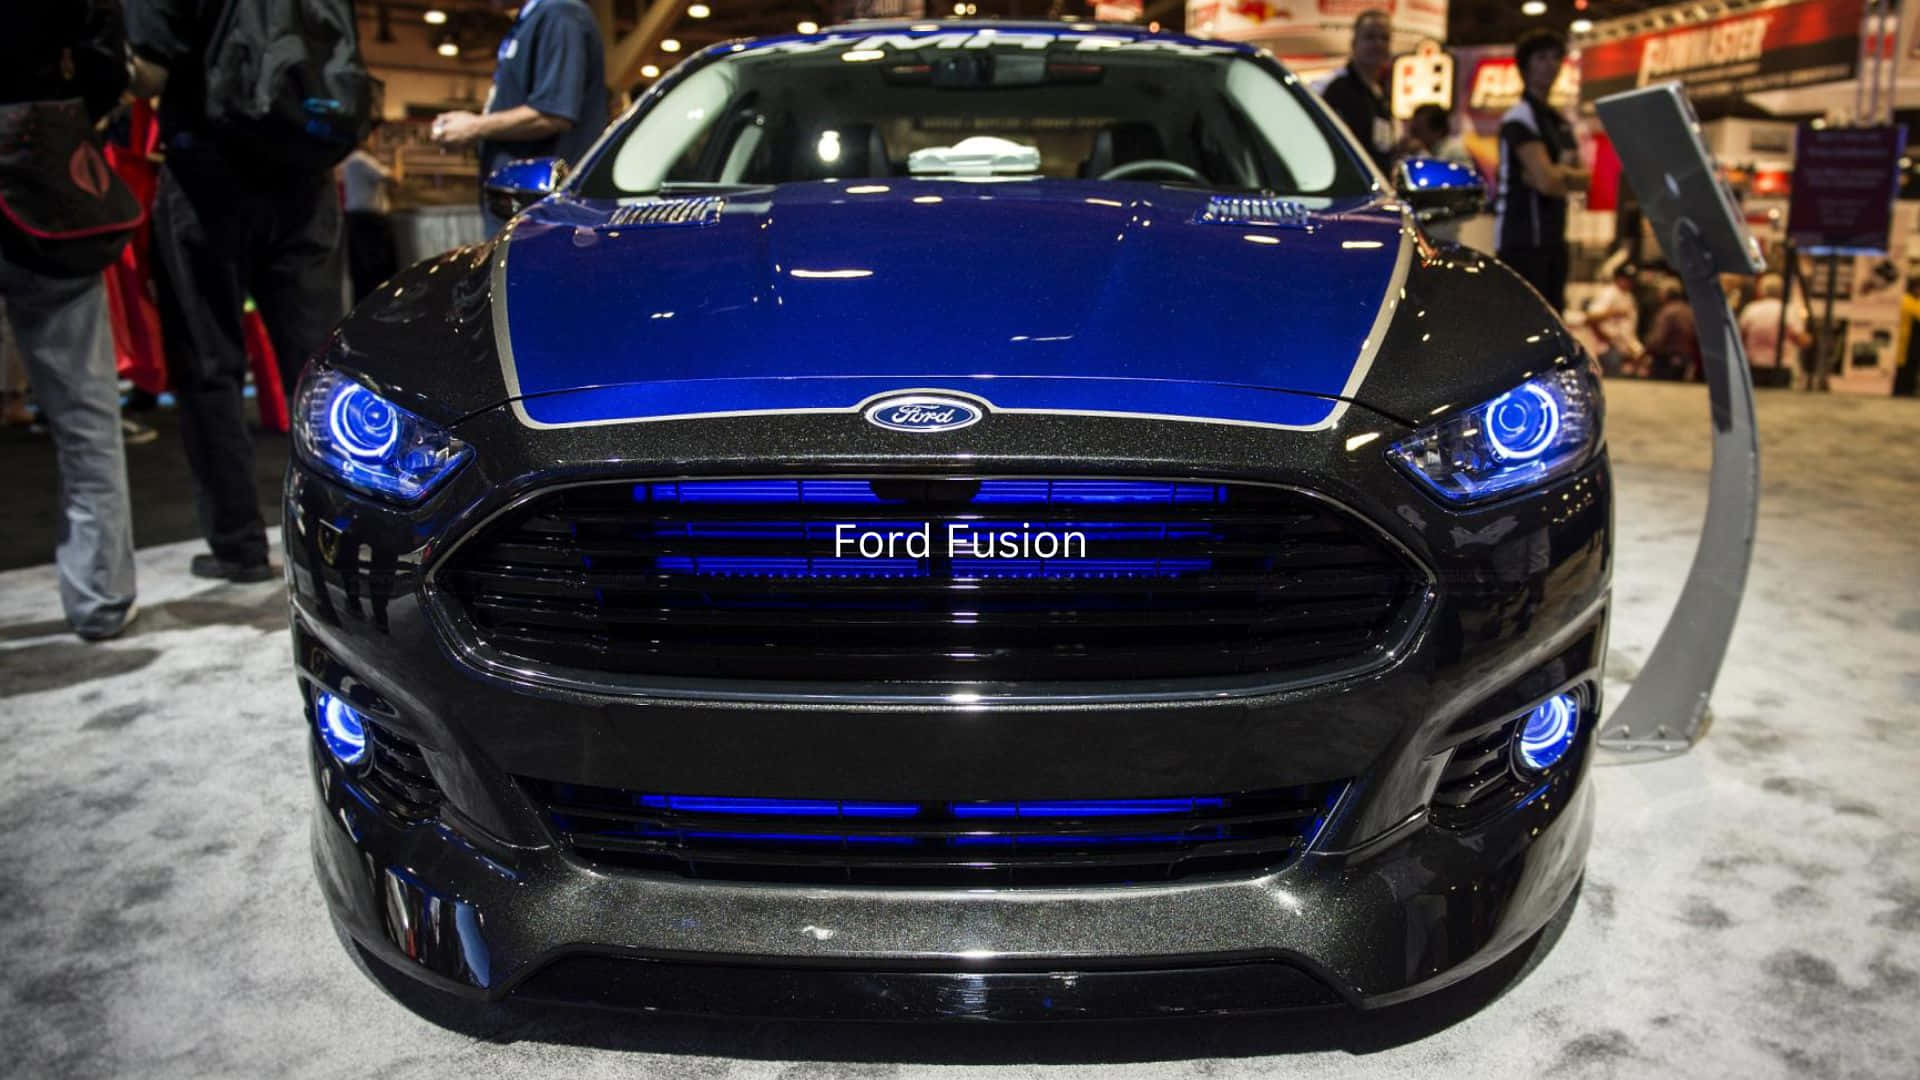 Stunning Ford Fusion in Action Wallpaper